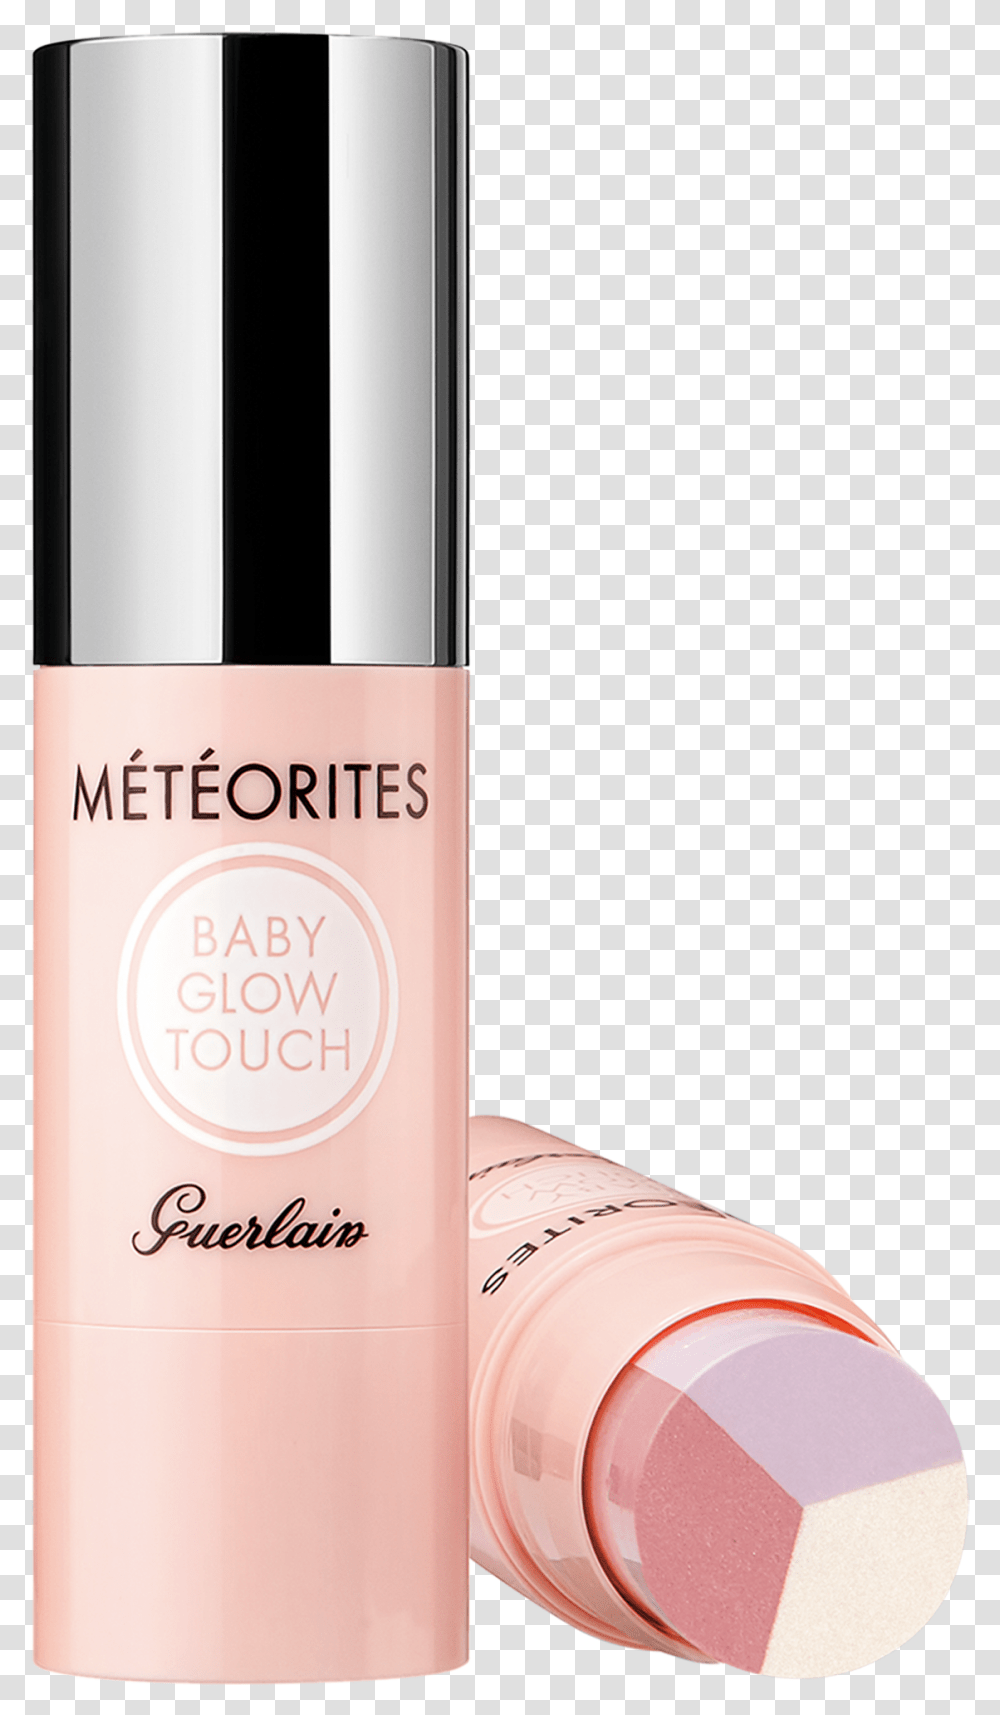 Mtorites Baby Glow Touch Guerlain Meteorites Baby Glow Touch, Cosmetics, Bottle, Deodorant, Perfume Transparent Png